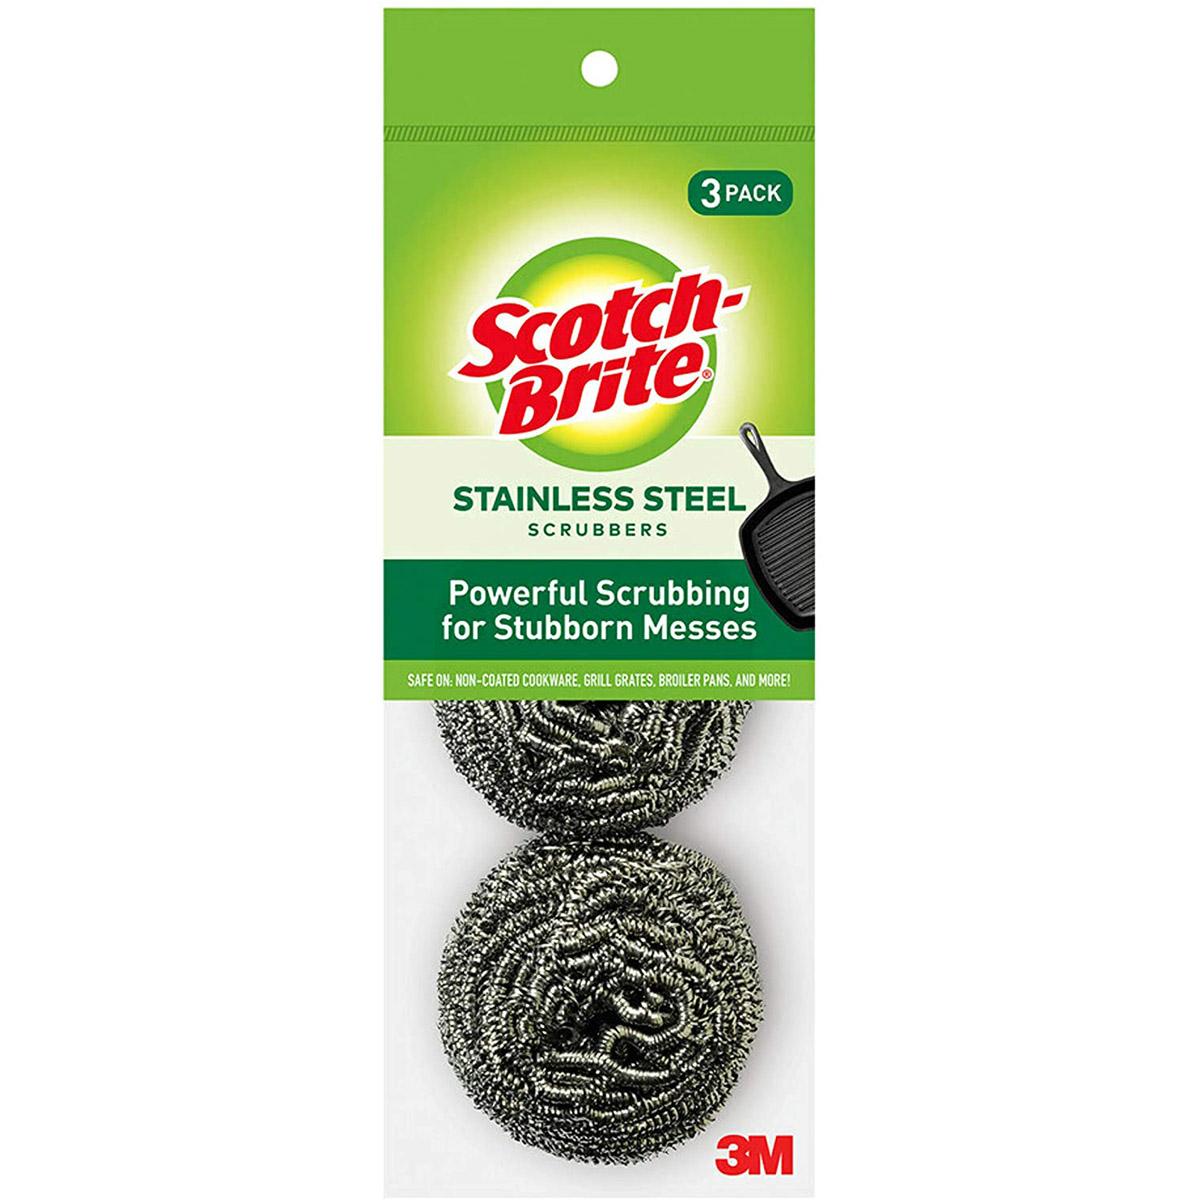 3 Scotch-Brite Stainless Steel Scrubbers for $1.04 Shipped